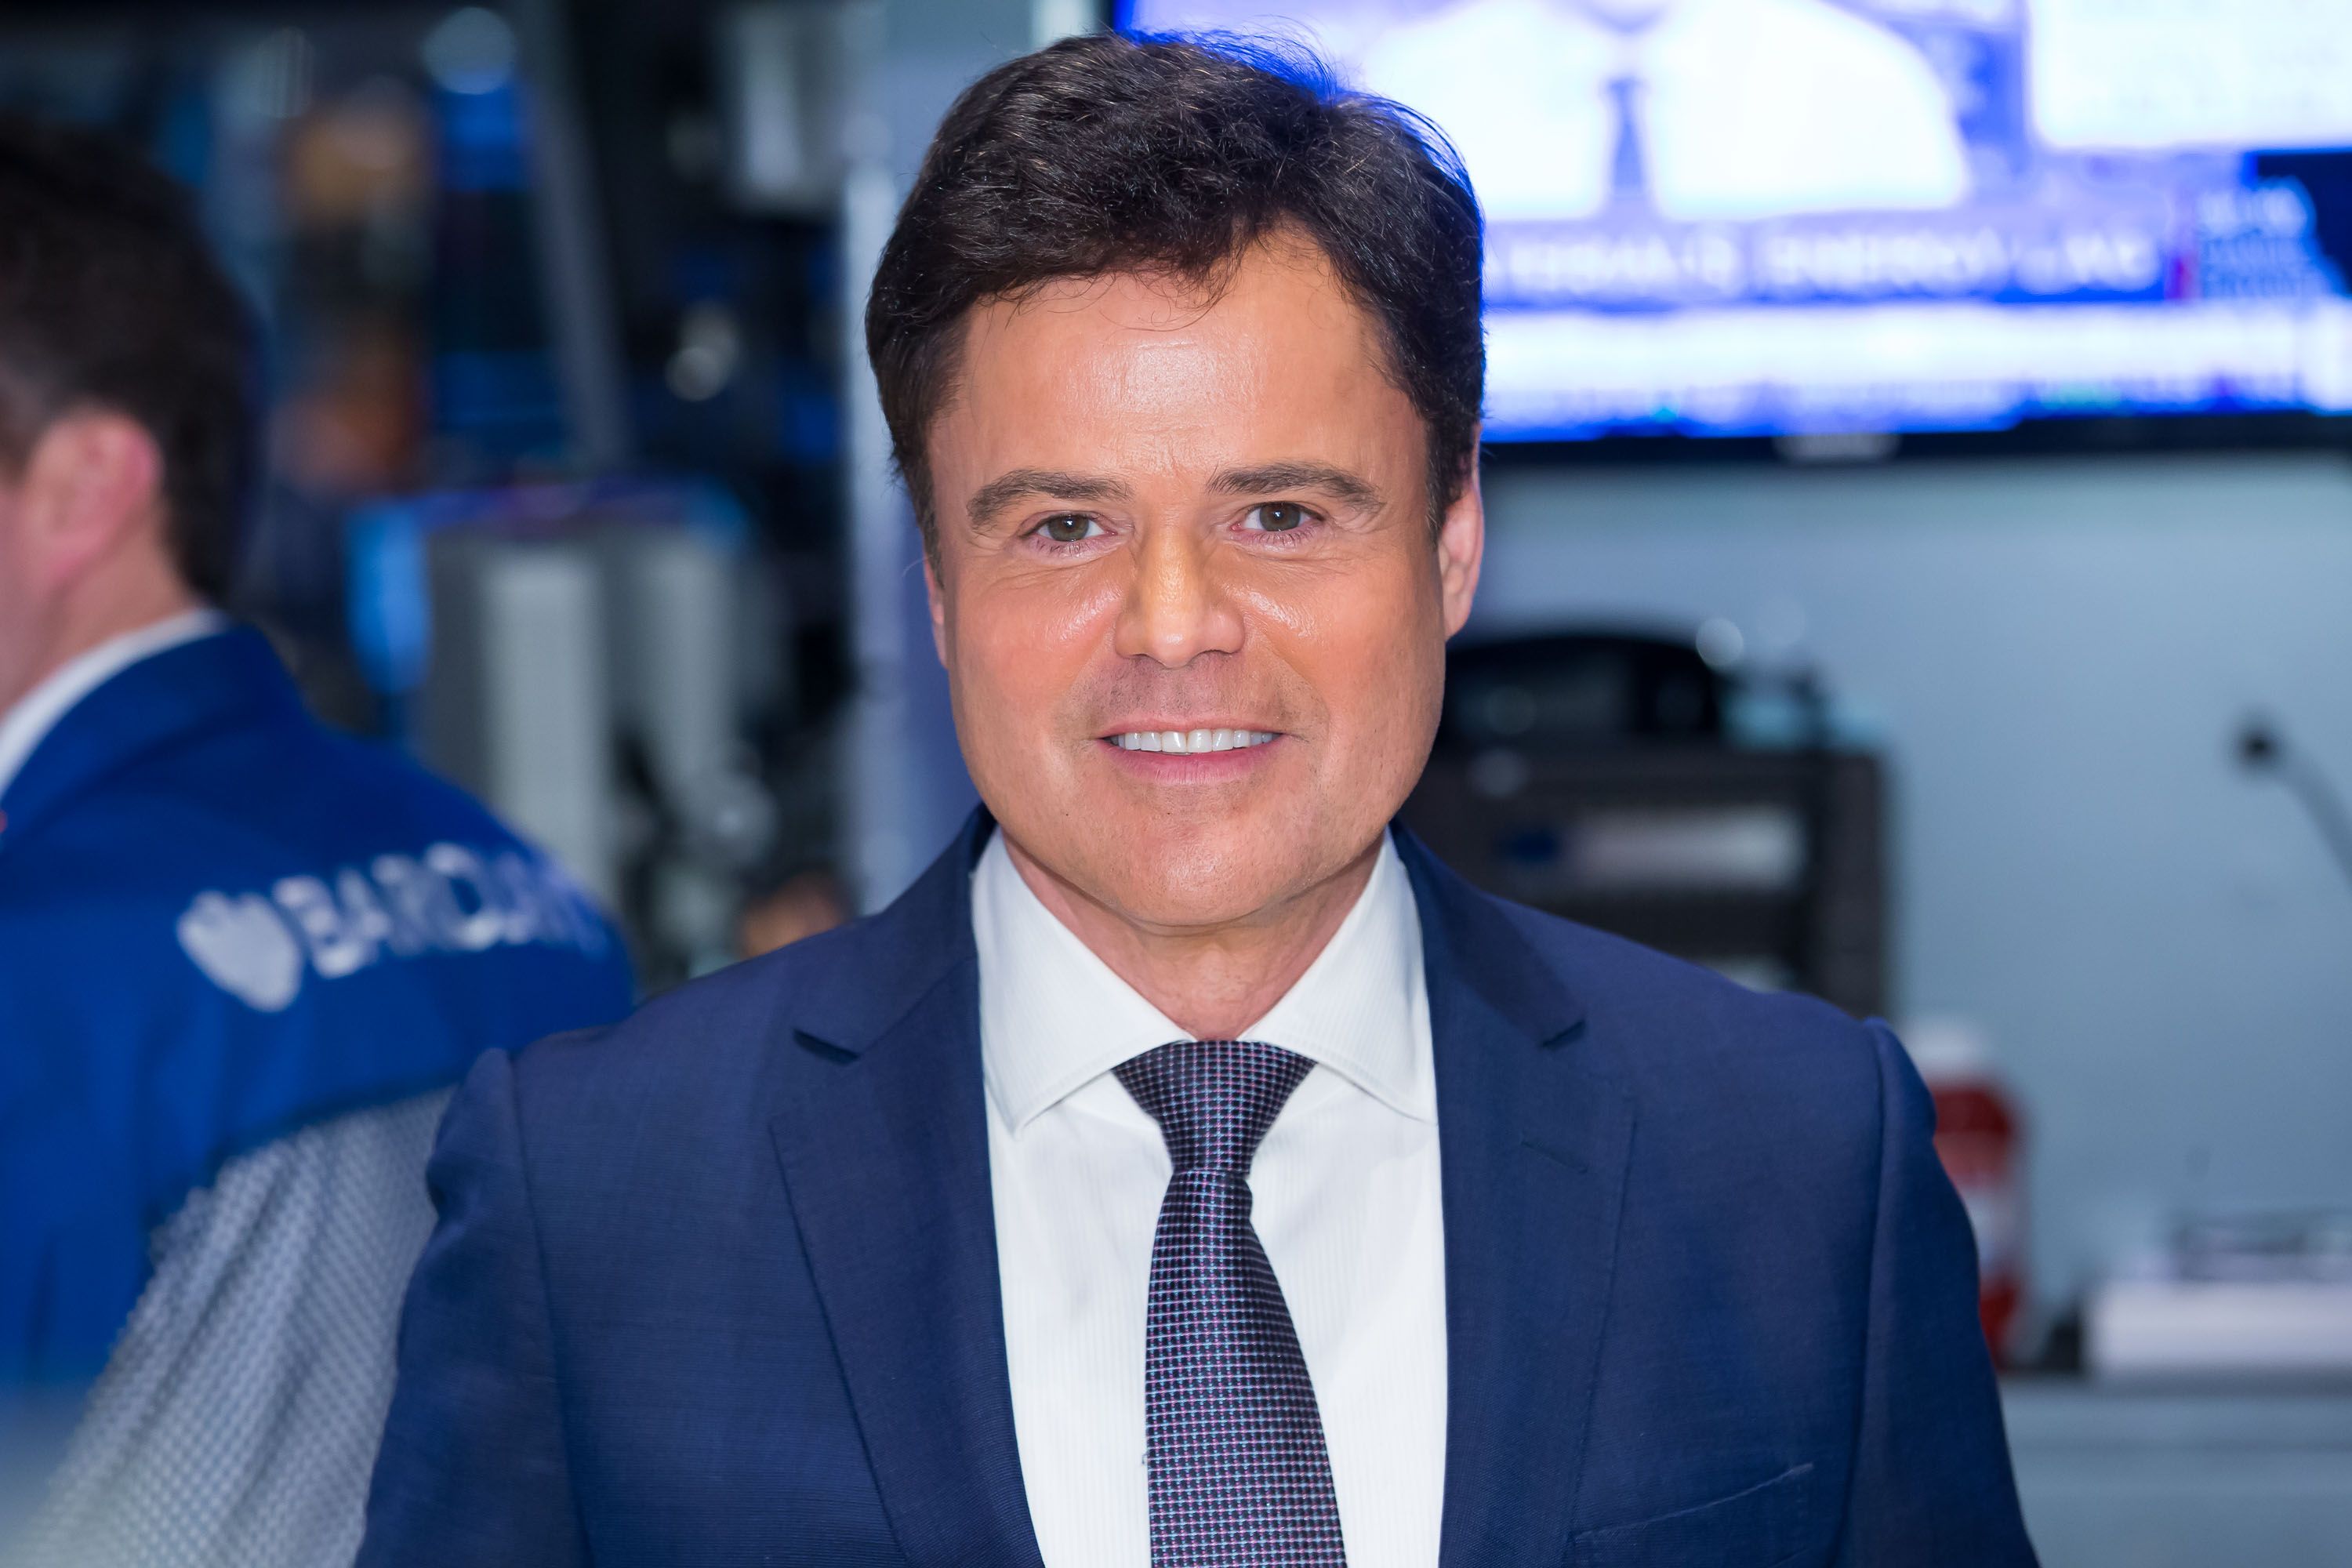 Donny Osmond rings the Closing Bell at New York Stock Exchange on January 13, 2015, in New York City | Photo: Getty Images